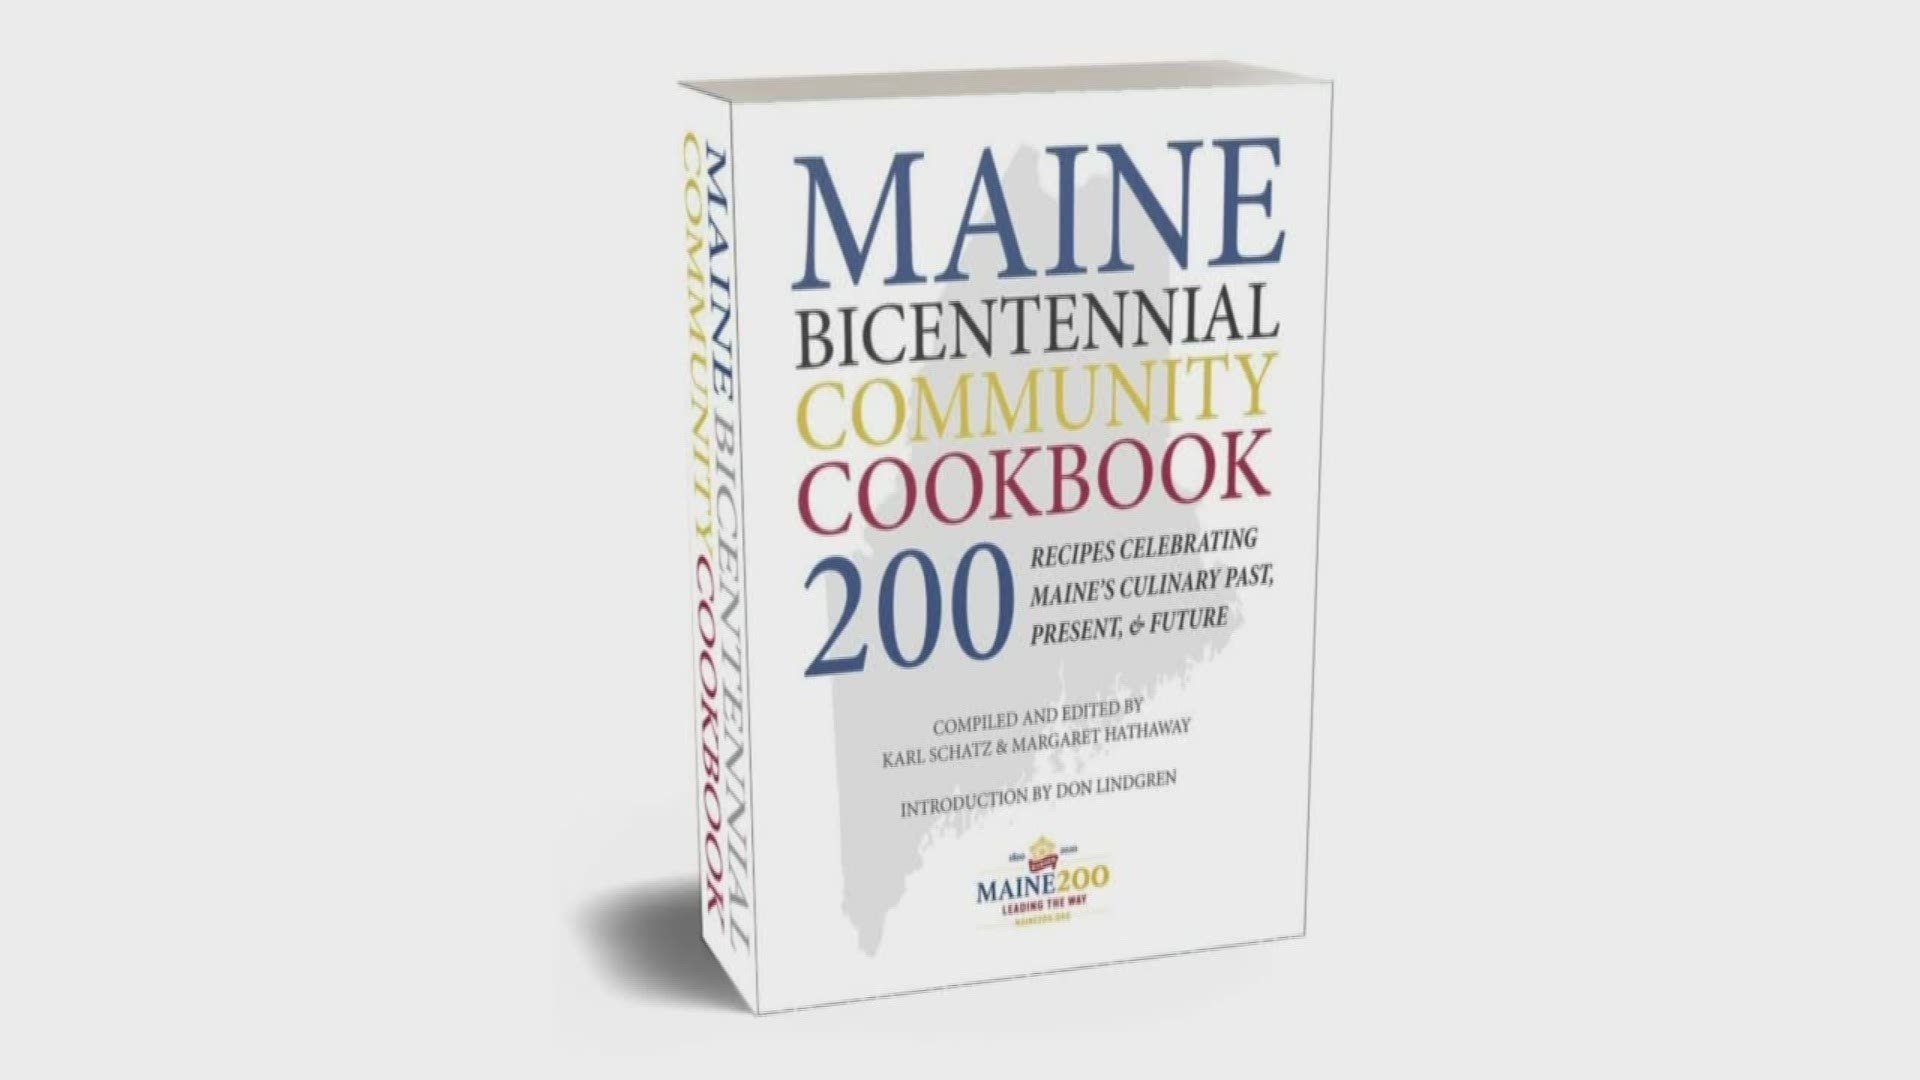 A cookbook is being put together, celebrating 200 years of Maine recipes.